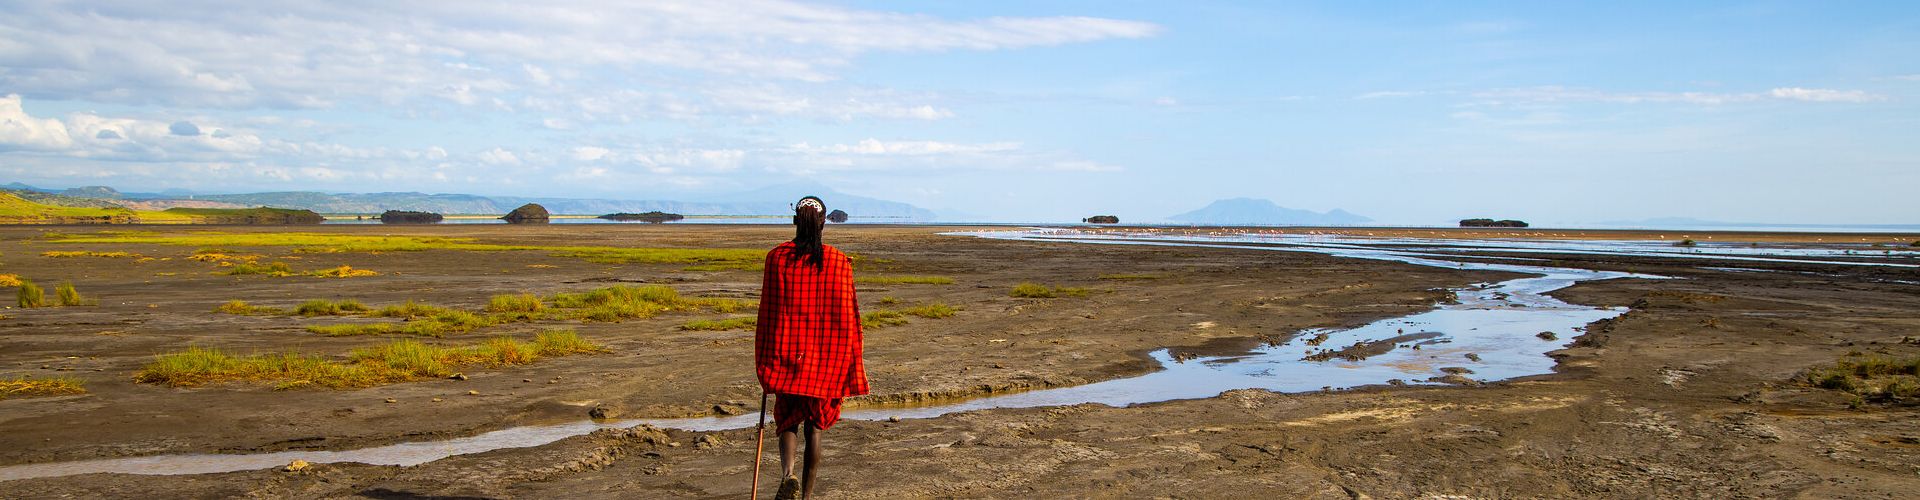 Experience traditional Maasai culture in the Lake Natron area with our Safari tours in Tanzania